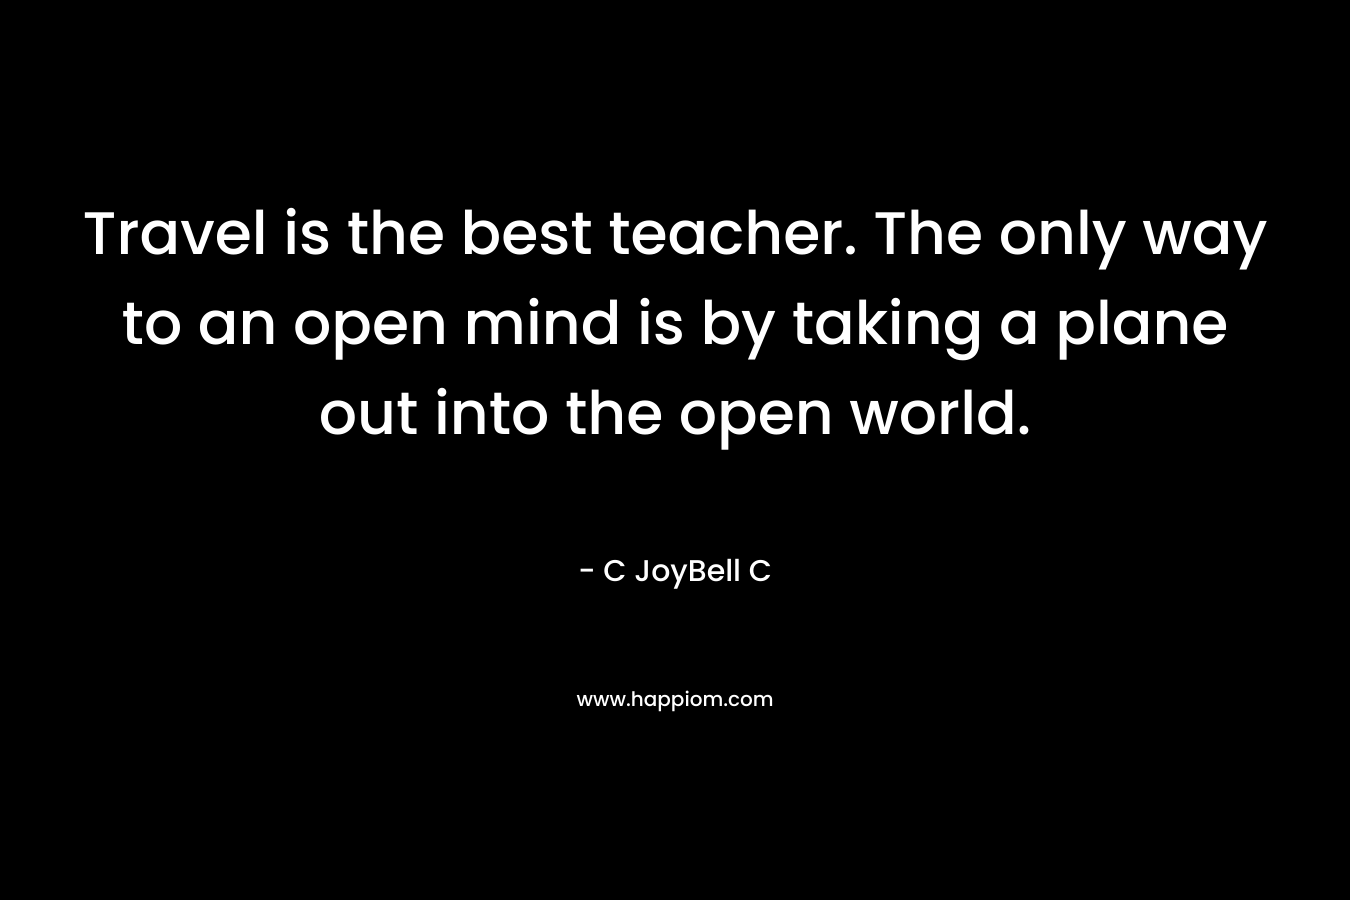 Travel is the best teacher. The only way to an open mind is by taking a plane out into the open world. – C JoyBell C